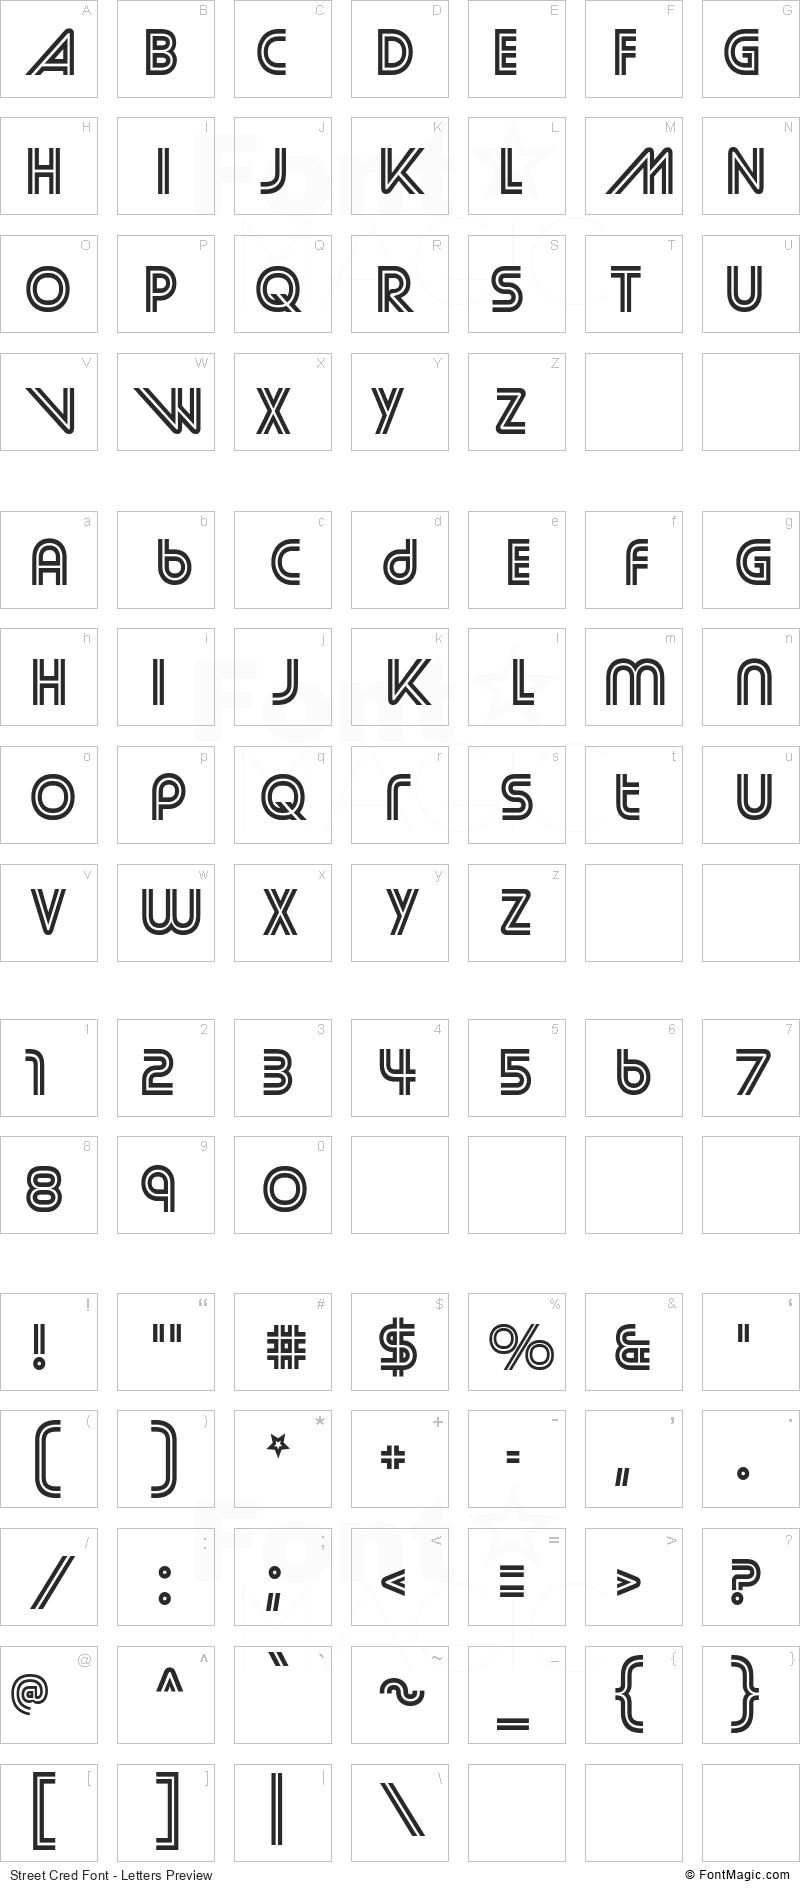 Street Cred Font - All Latters Preview Chart